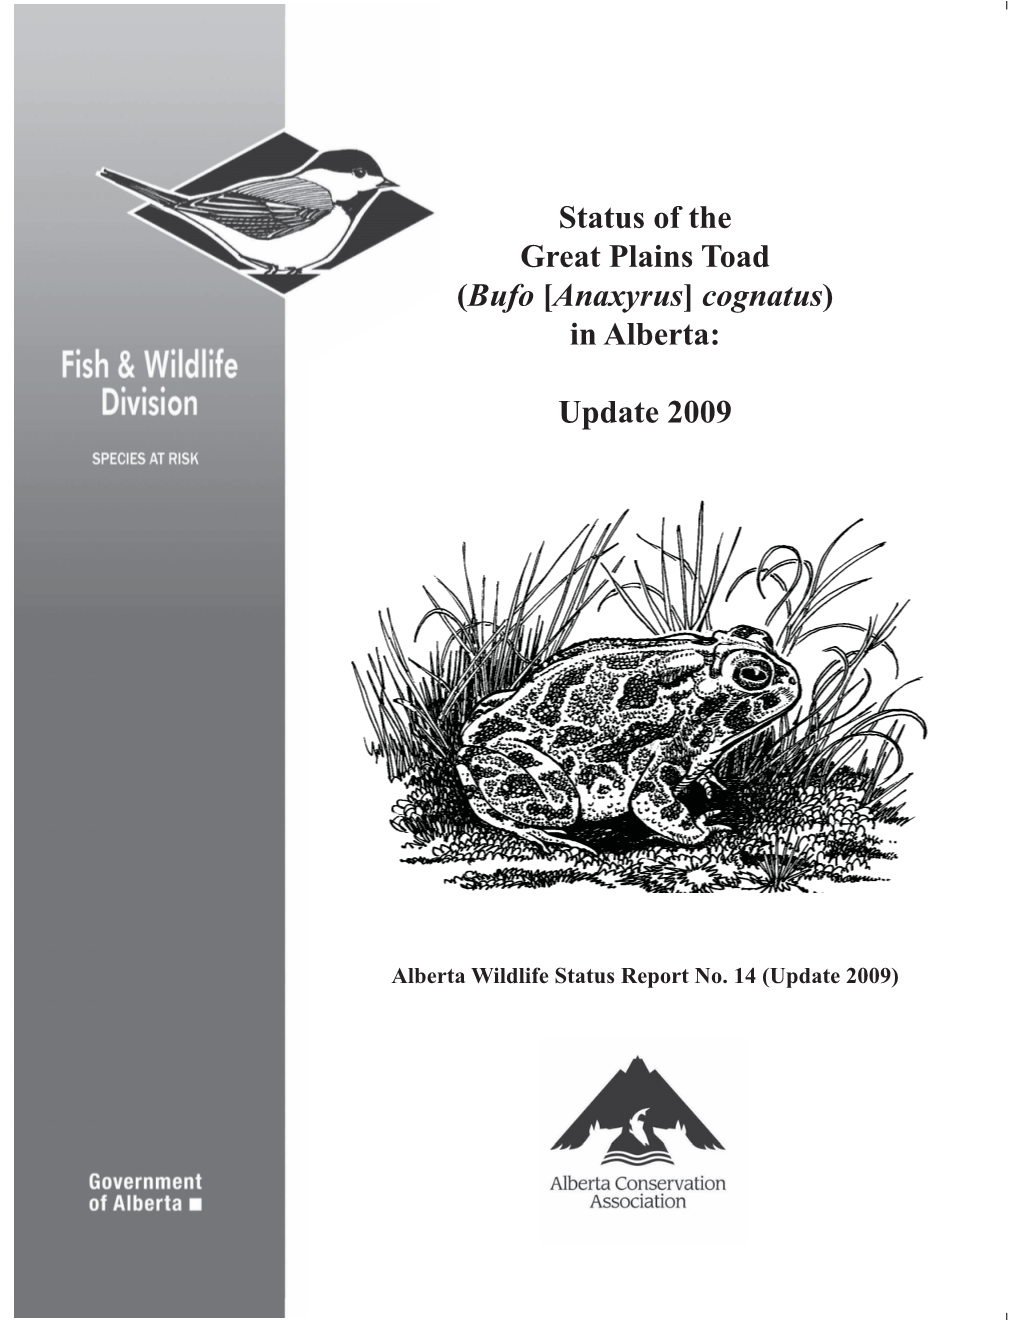 Status of the Great Plains Toad (Bufo [Anaxyrus] Cognatus) in Alberta: Update 2009